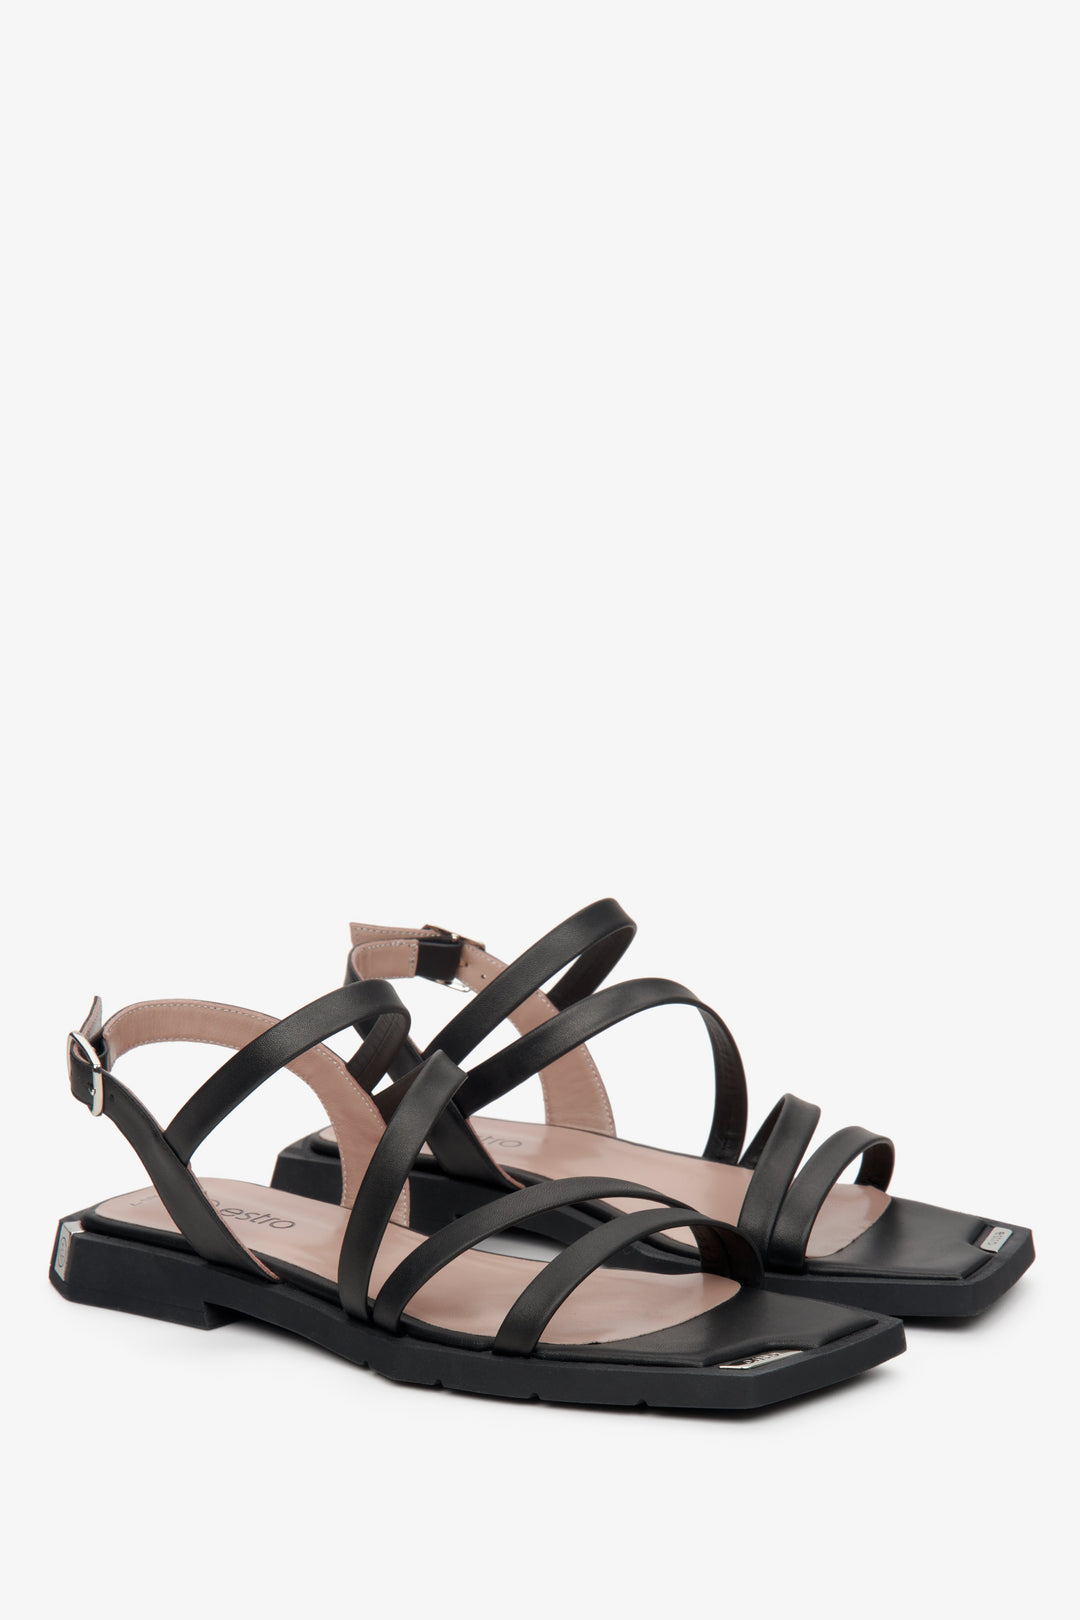 Estro's women's black leather sandals made of genuine leather with thin straps - presentation of the front and side of the shoes.